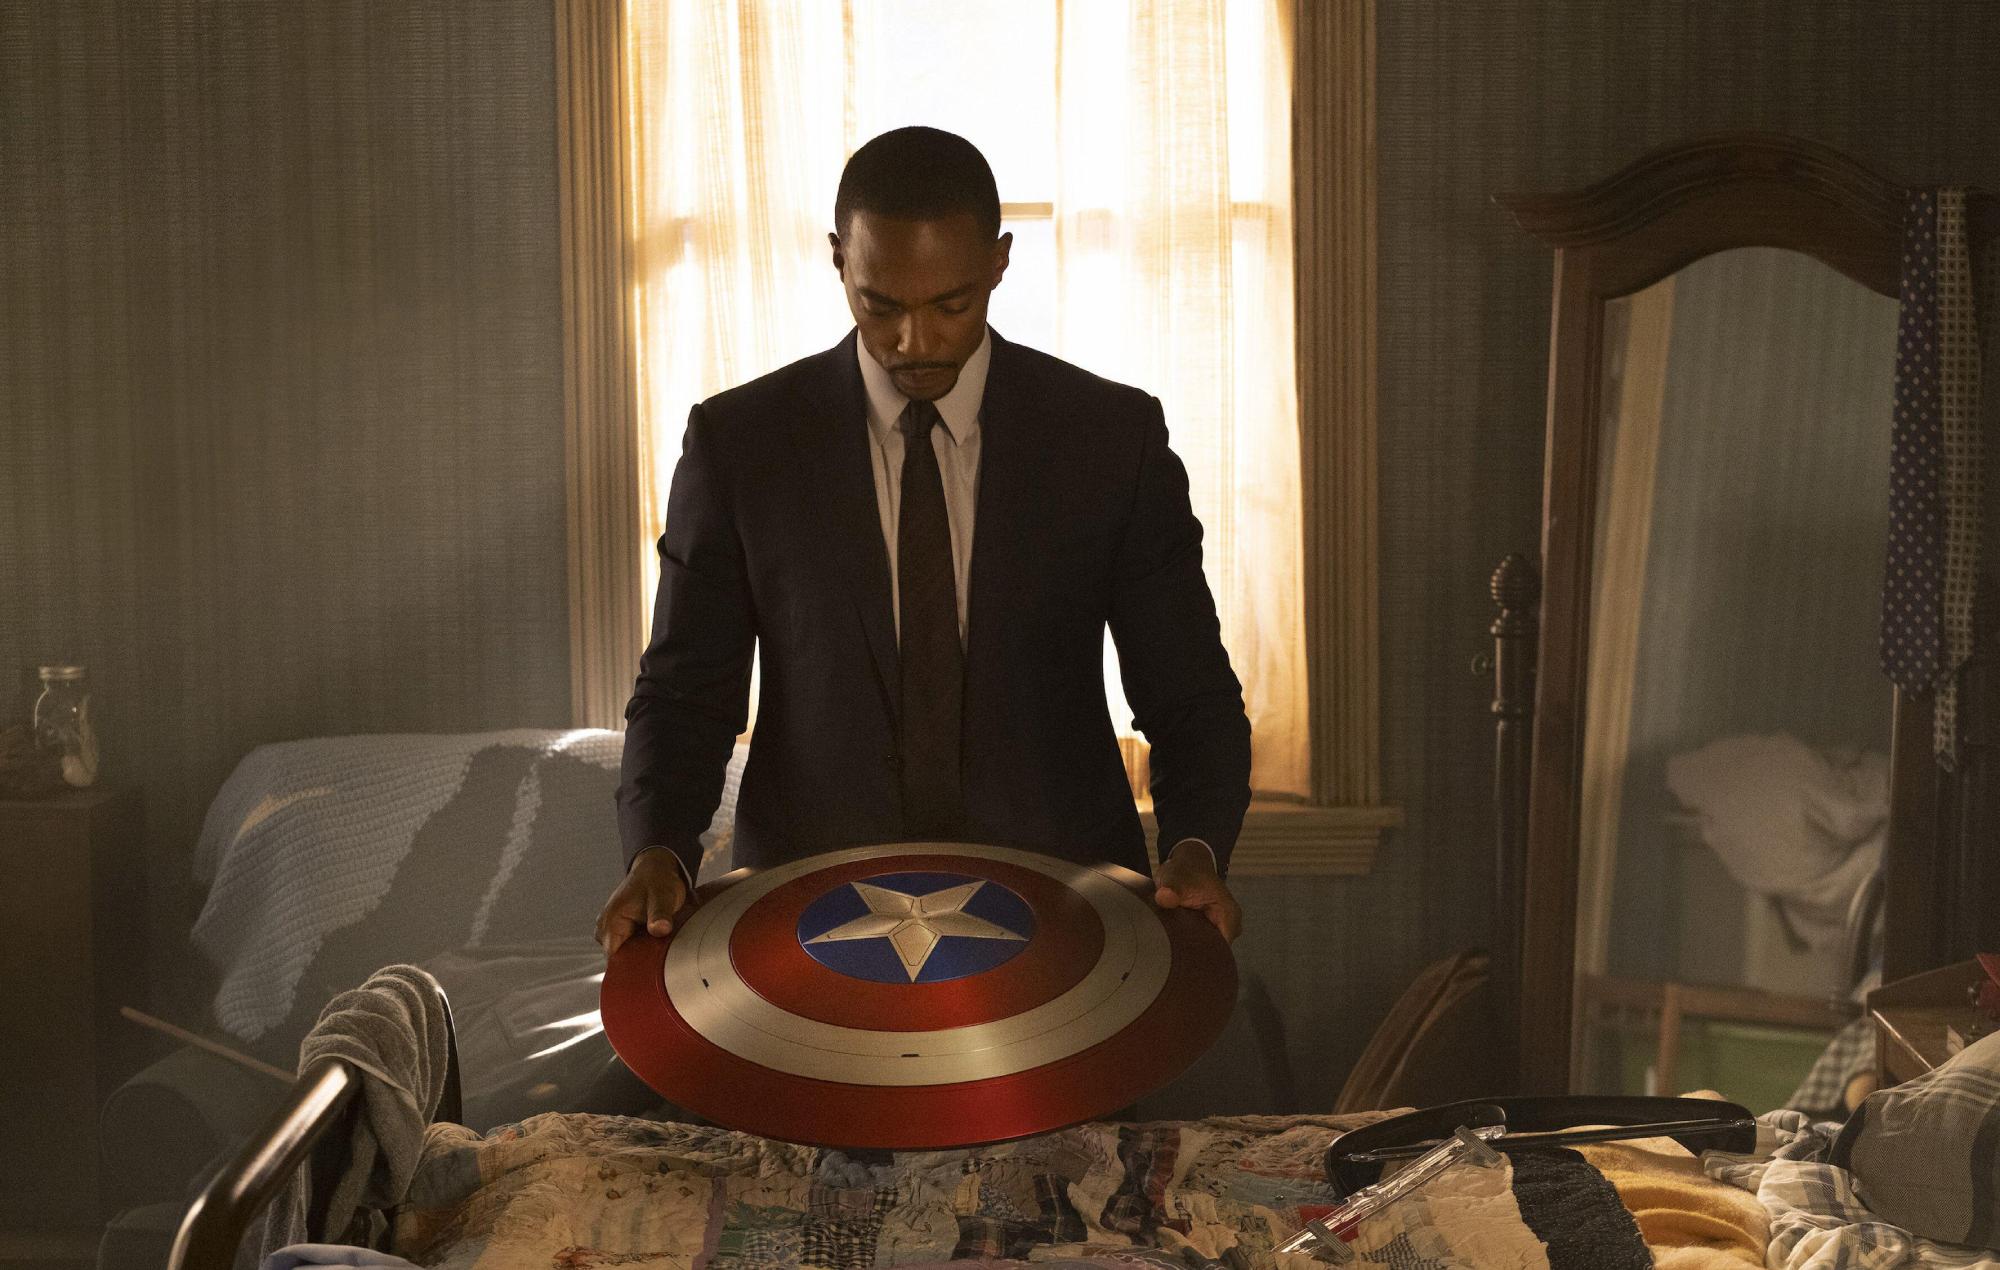 Captain America 4' is on the way from 'The Falcon And The Winter Soldier' team